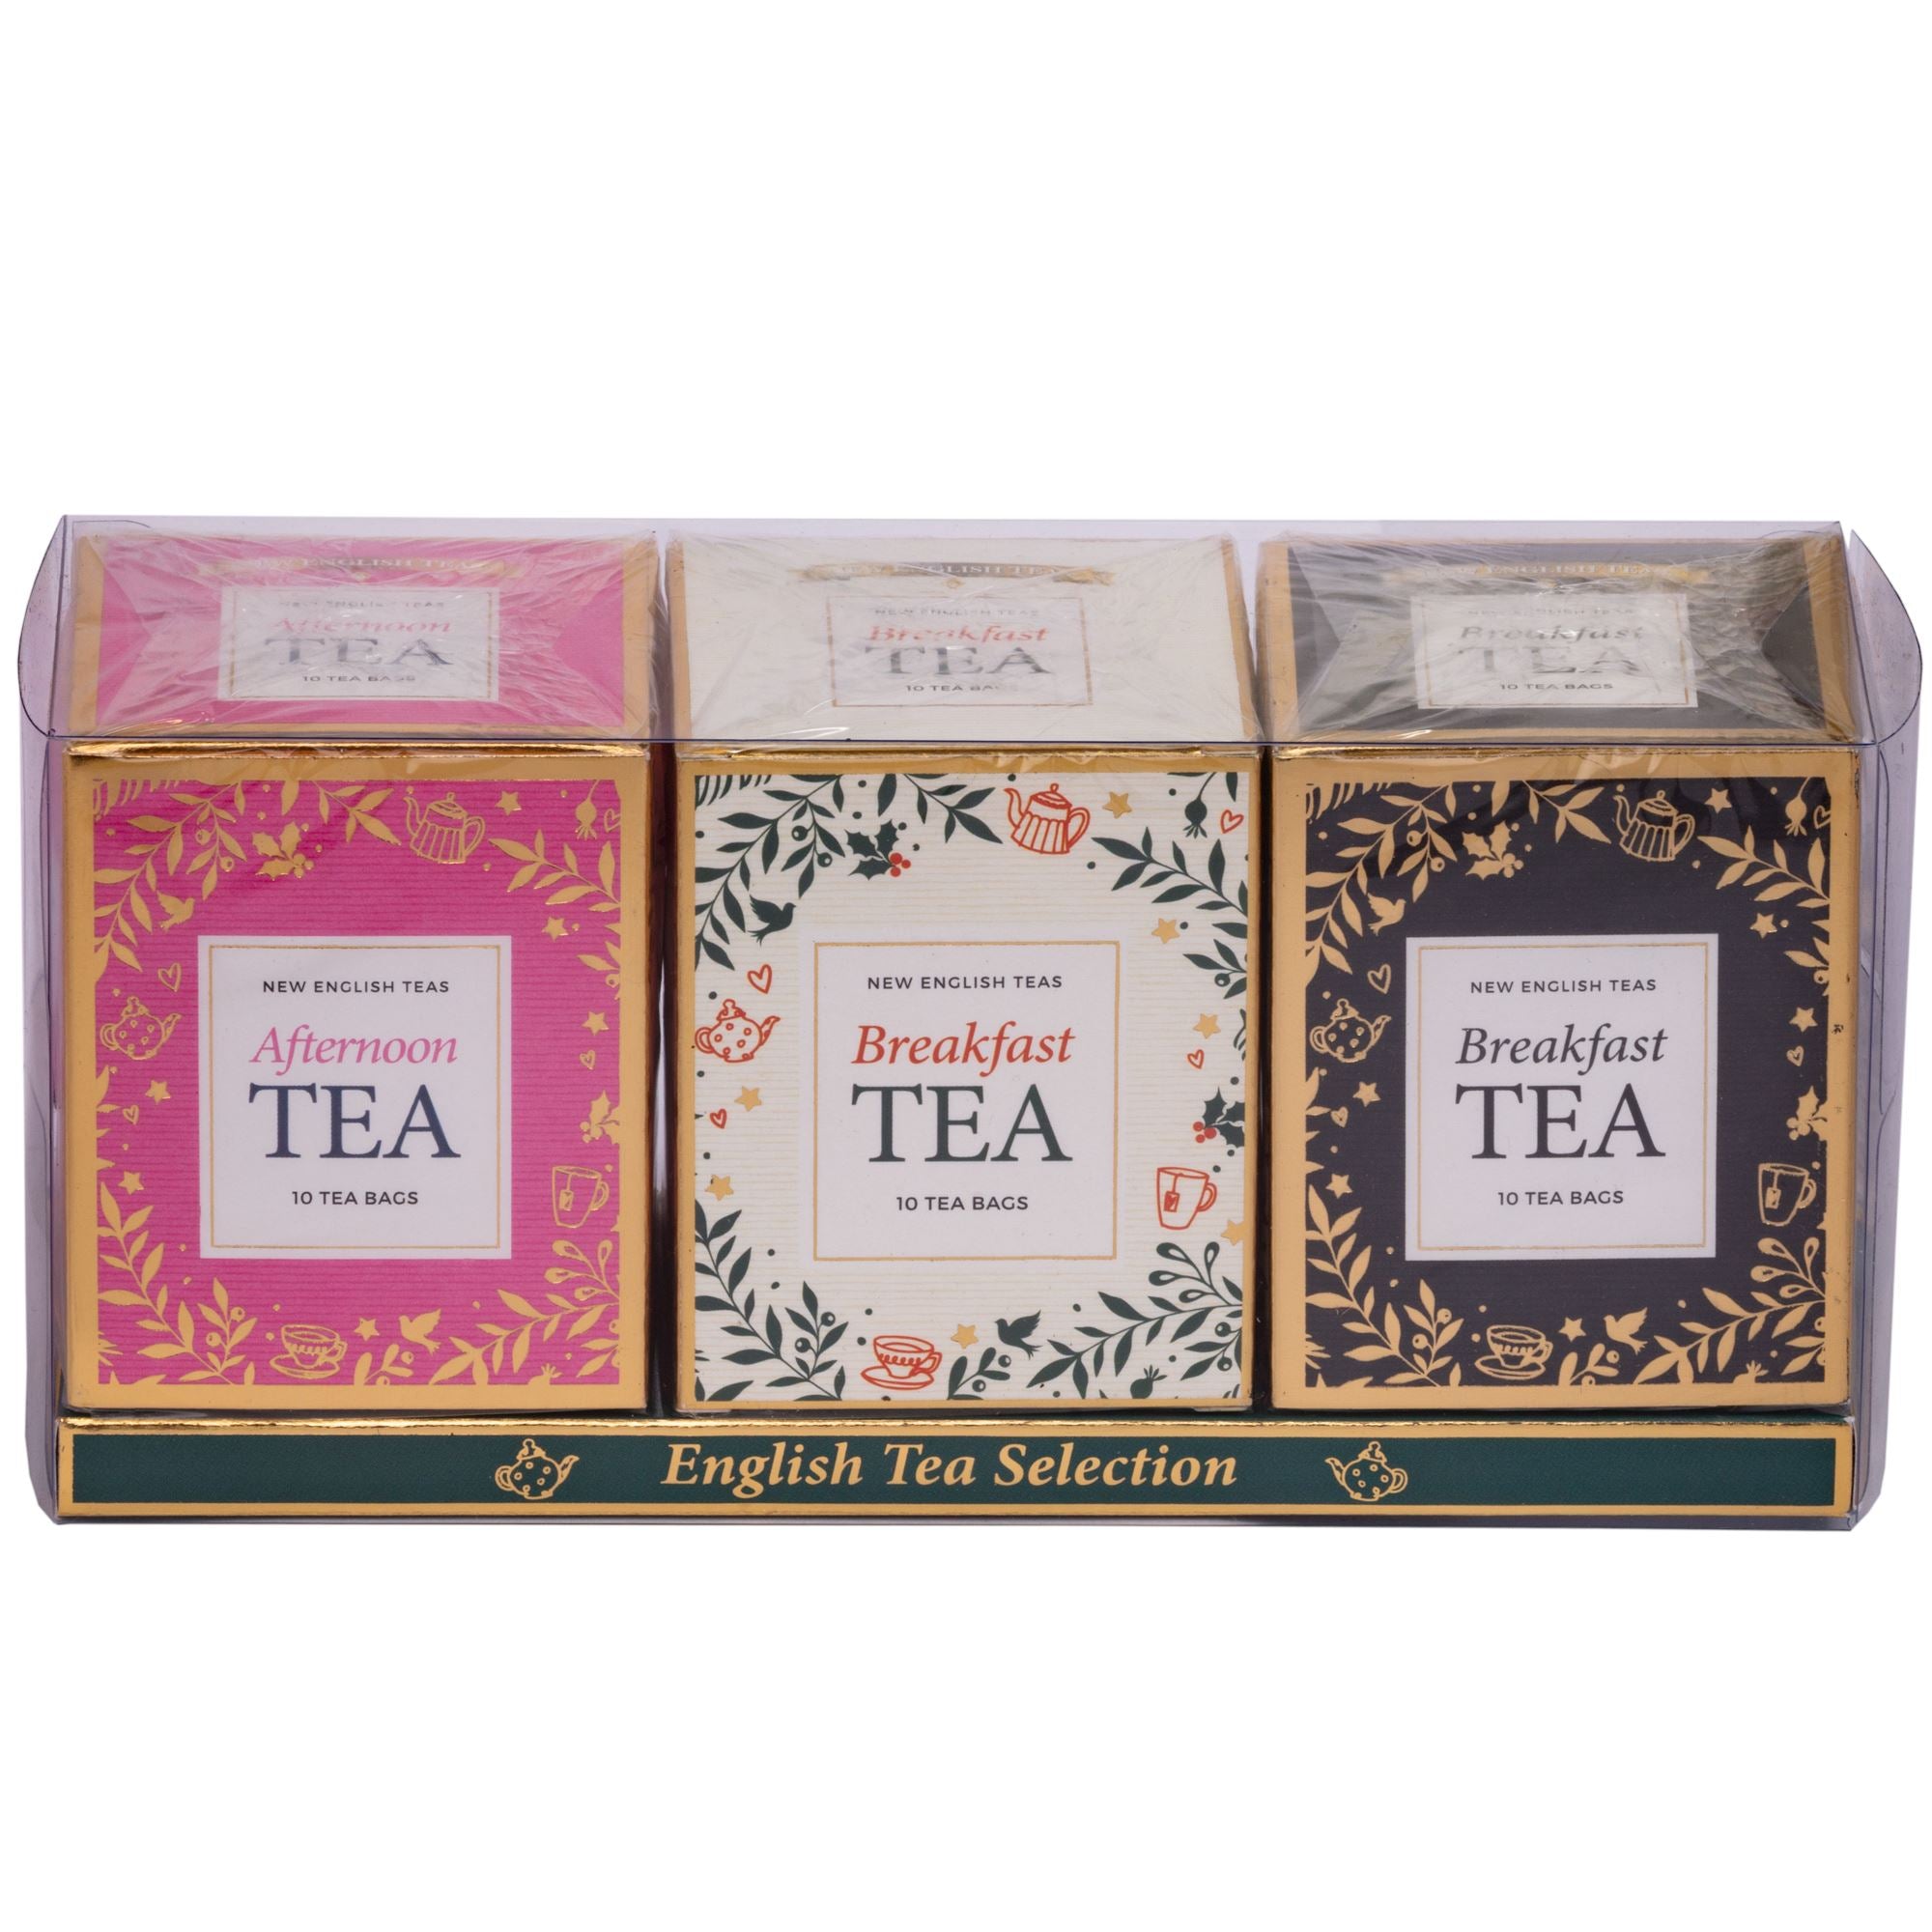 Festive Tea Carton Gift Pack with 30 English Teabags - Pink, Ivory & Grey New English Teas 